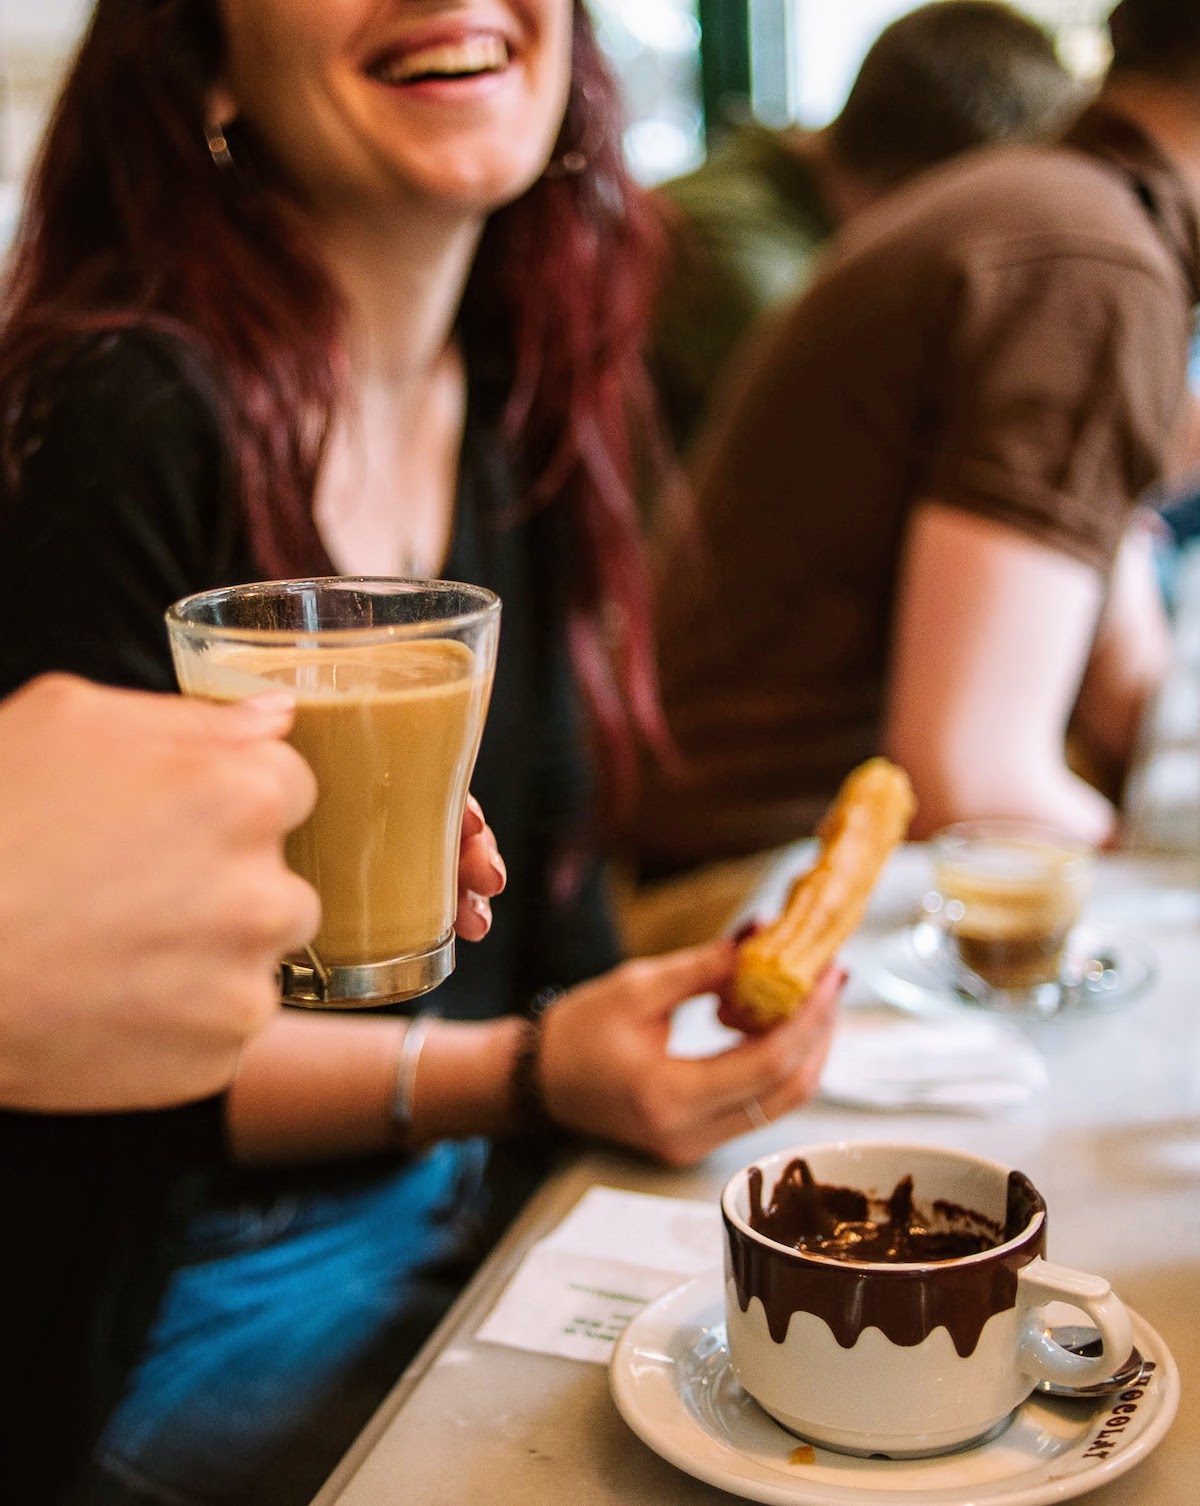 A person's hand holding a clear glass of coffee, with a woman laughing while eating churros and chocolate visible in the background